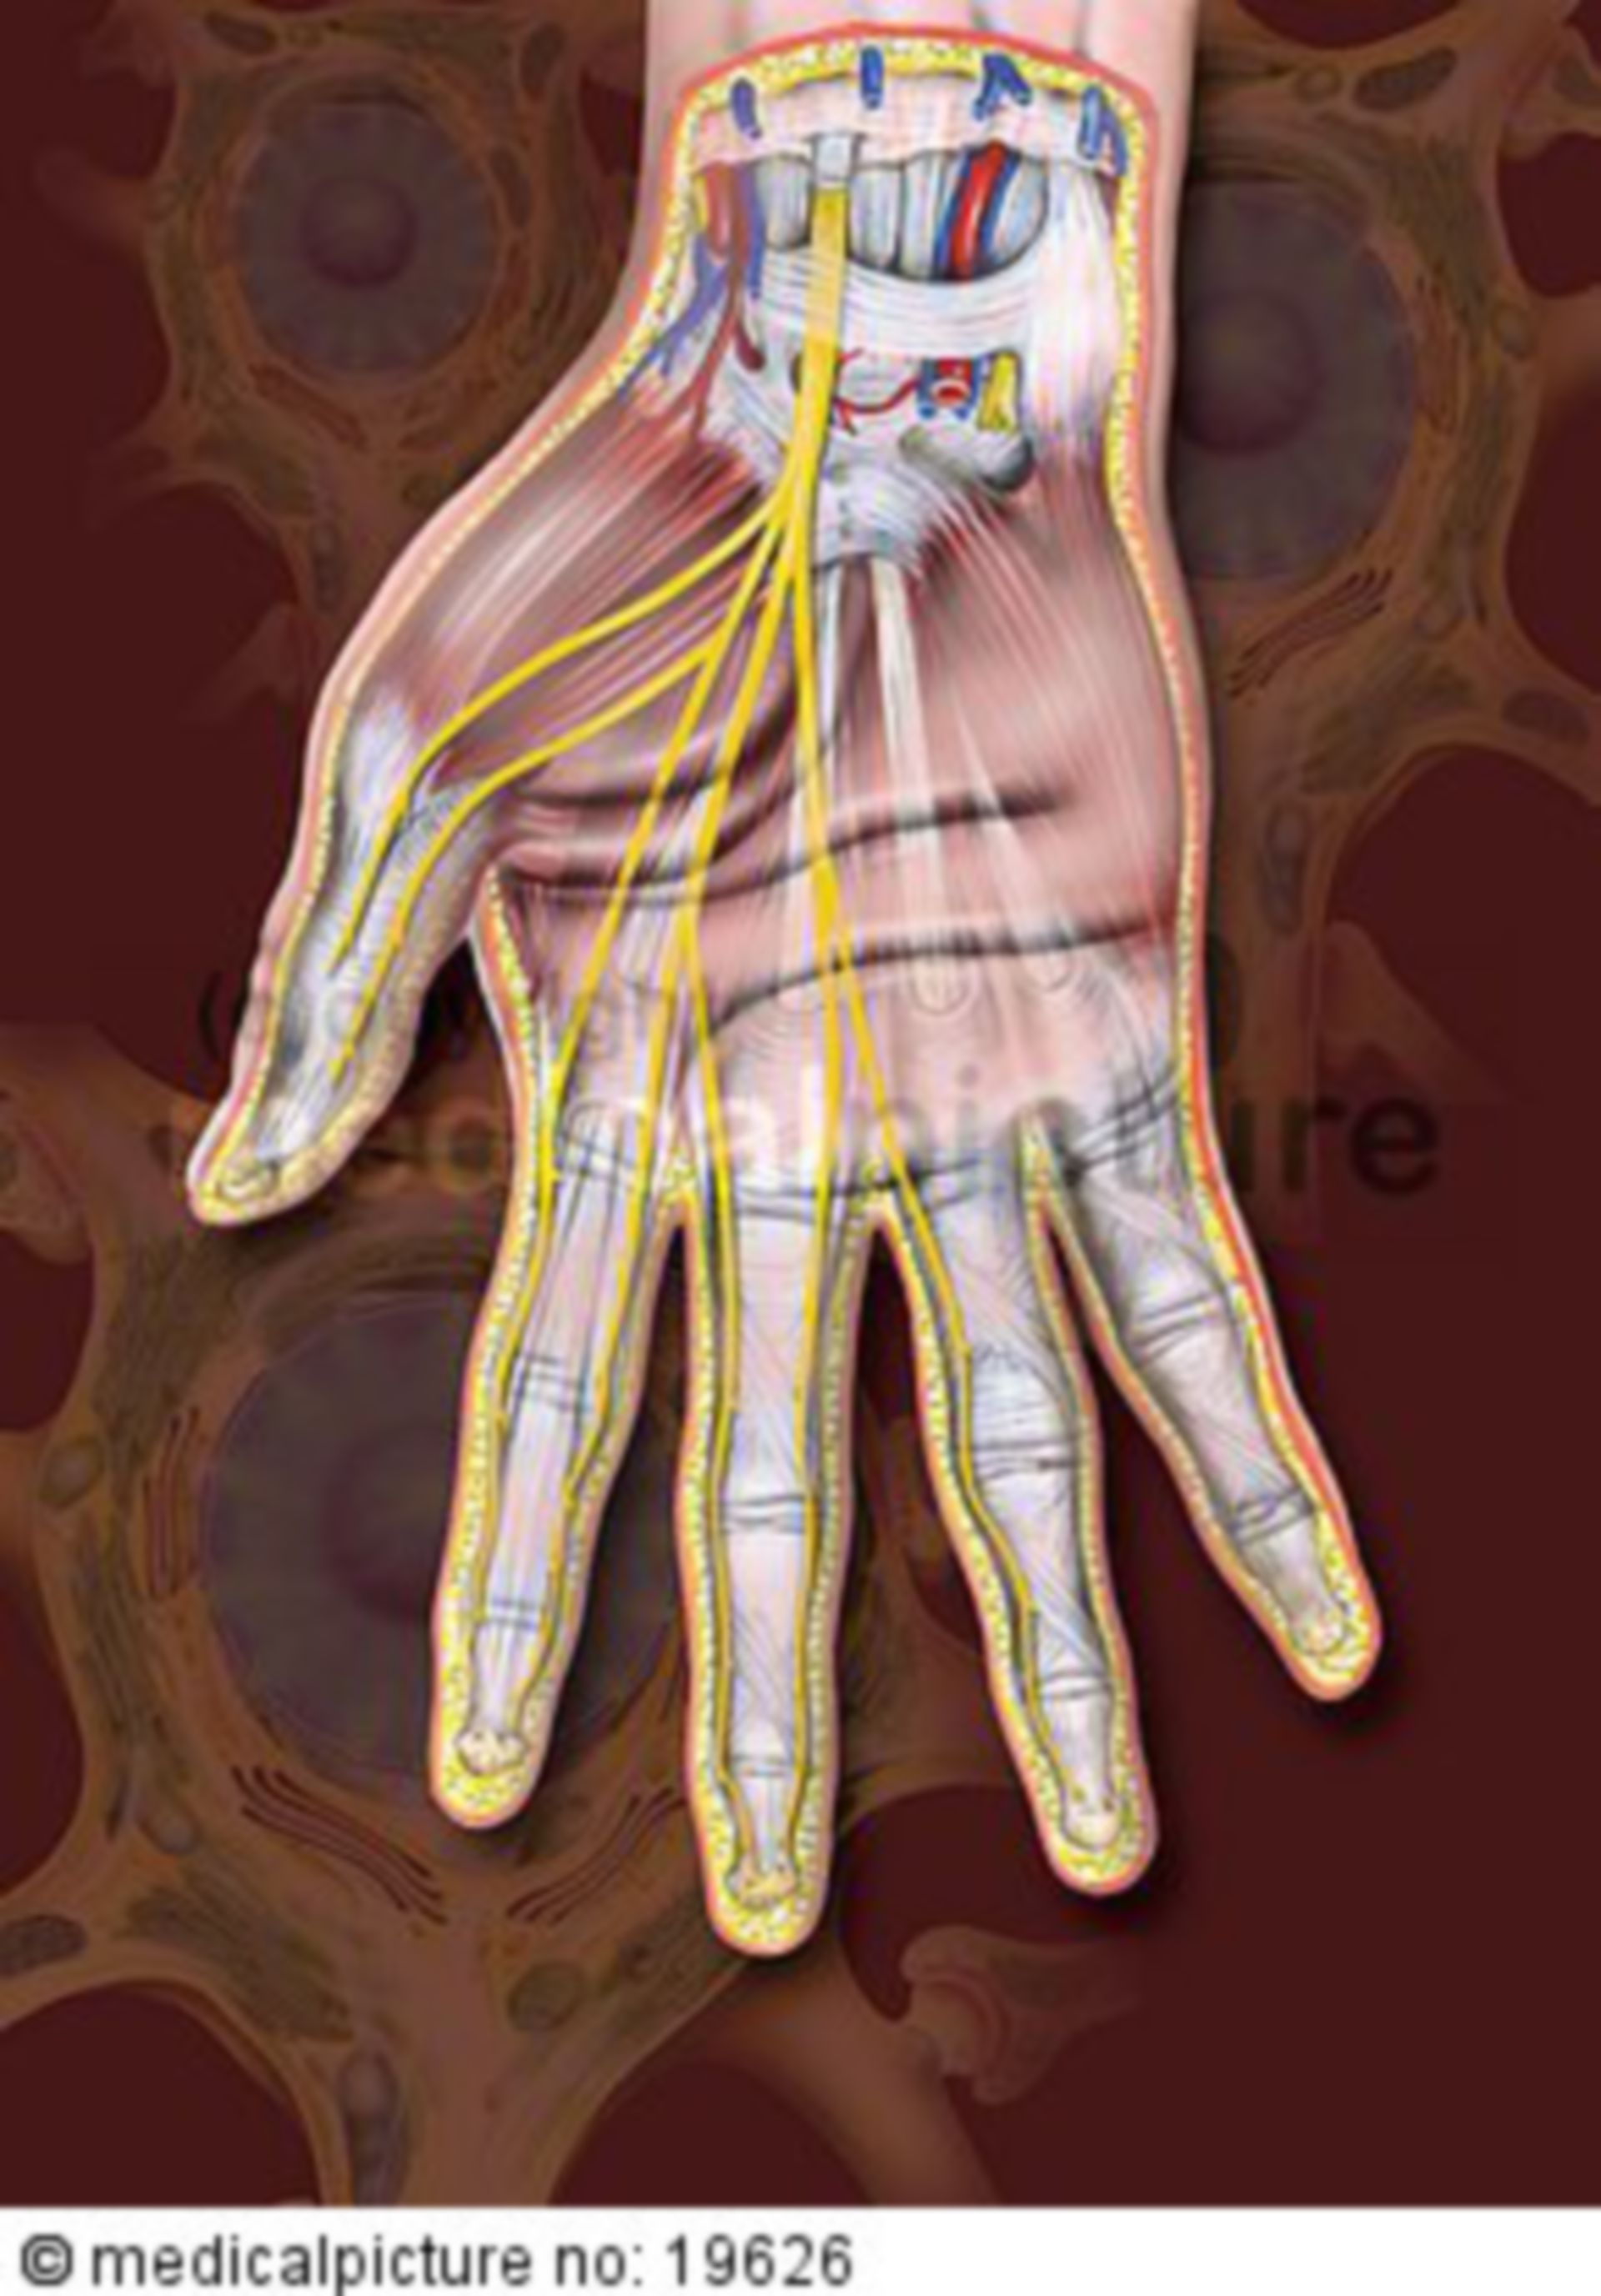 The median nerve of the hand